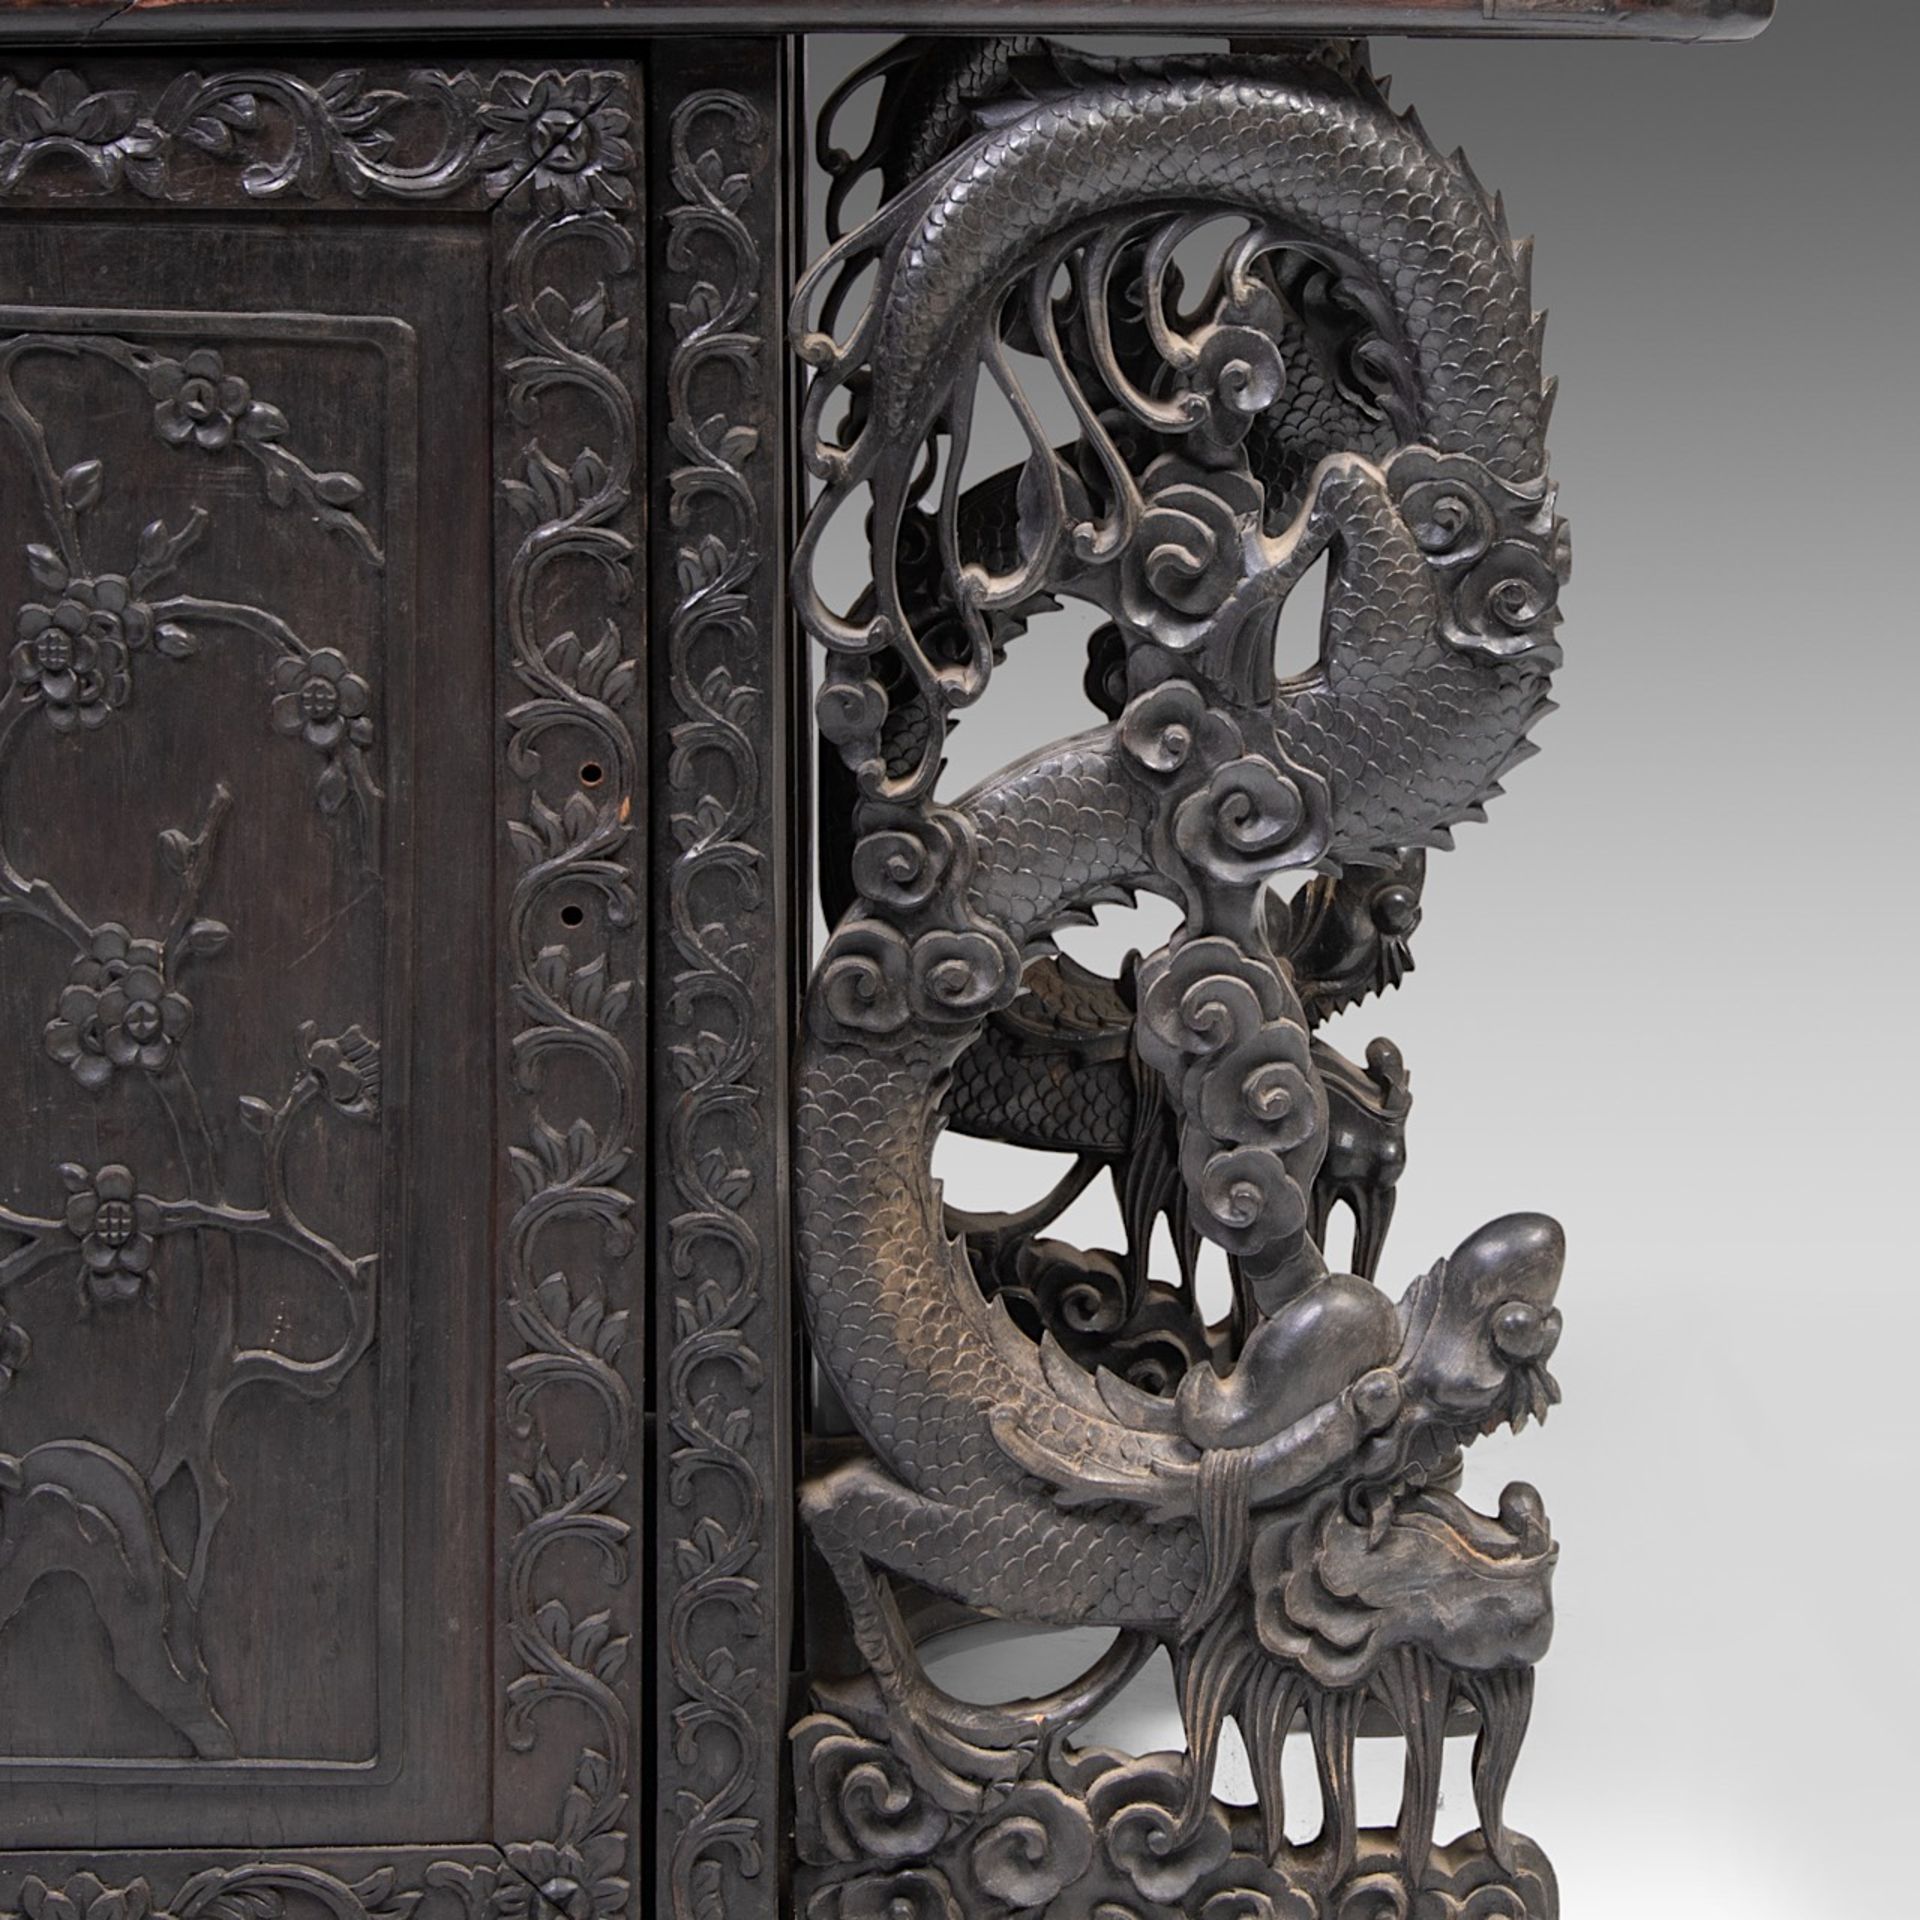 A compact South Chinese carved hardwood writing desk, 19thC, H 83 - W 66 - D 62 cm - Bild 8 aus 10